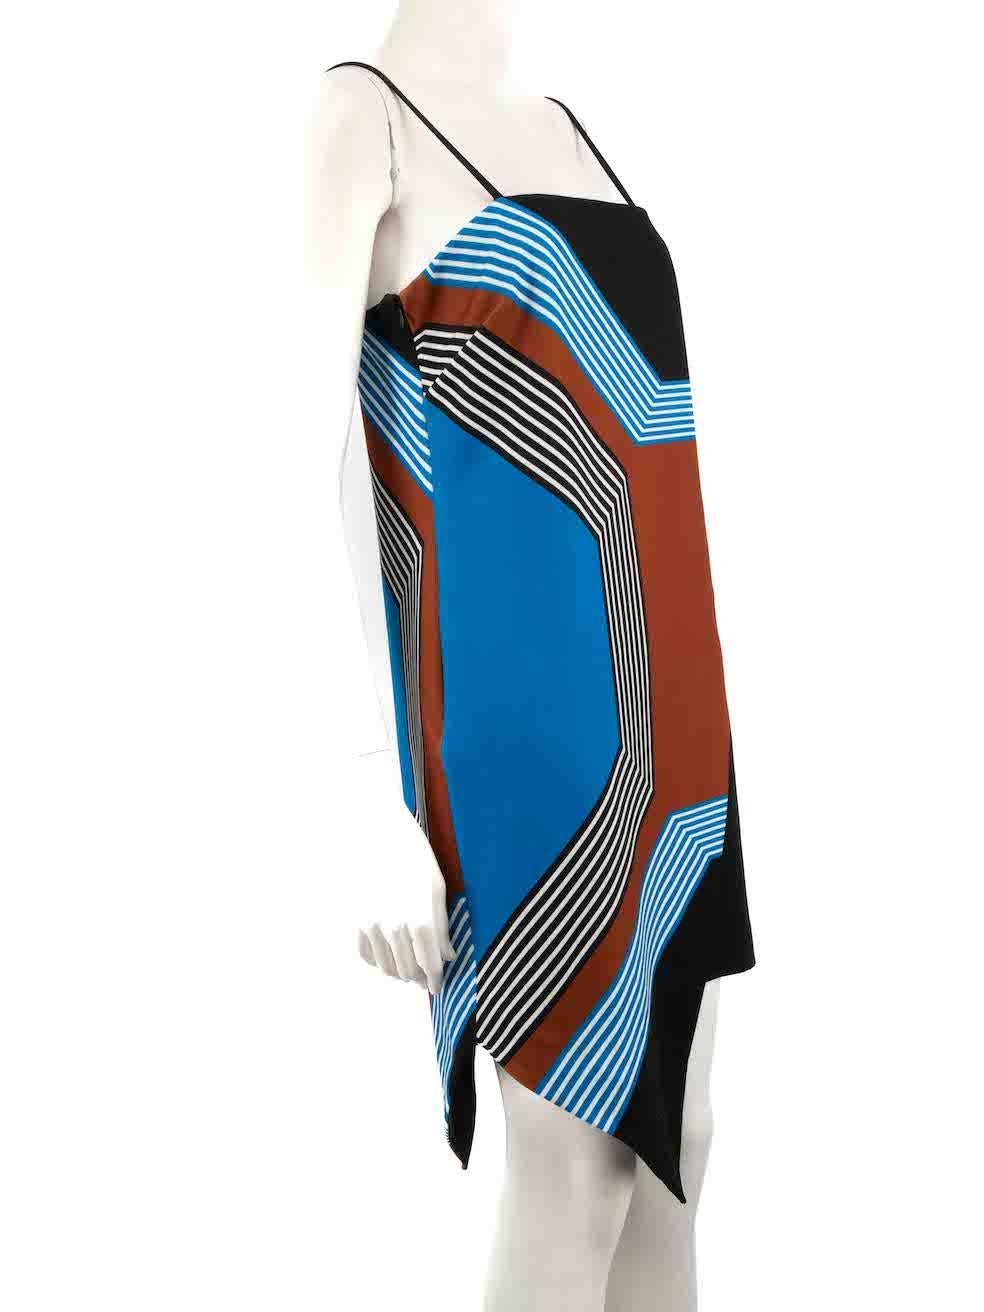 CONDITION is Very good. Hardly any visible wear to is evident on this used Milly designer resale item.
 
 
 
 Details
 
 
 Multicolour- Black, brown, blue, white
 
 Polyester
 
 Dress
 
 Geometric pattern
 
 Asymmetric hem
 
 Sleeveless
 
 Square